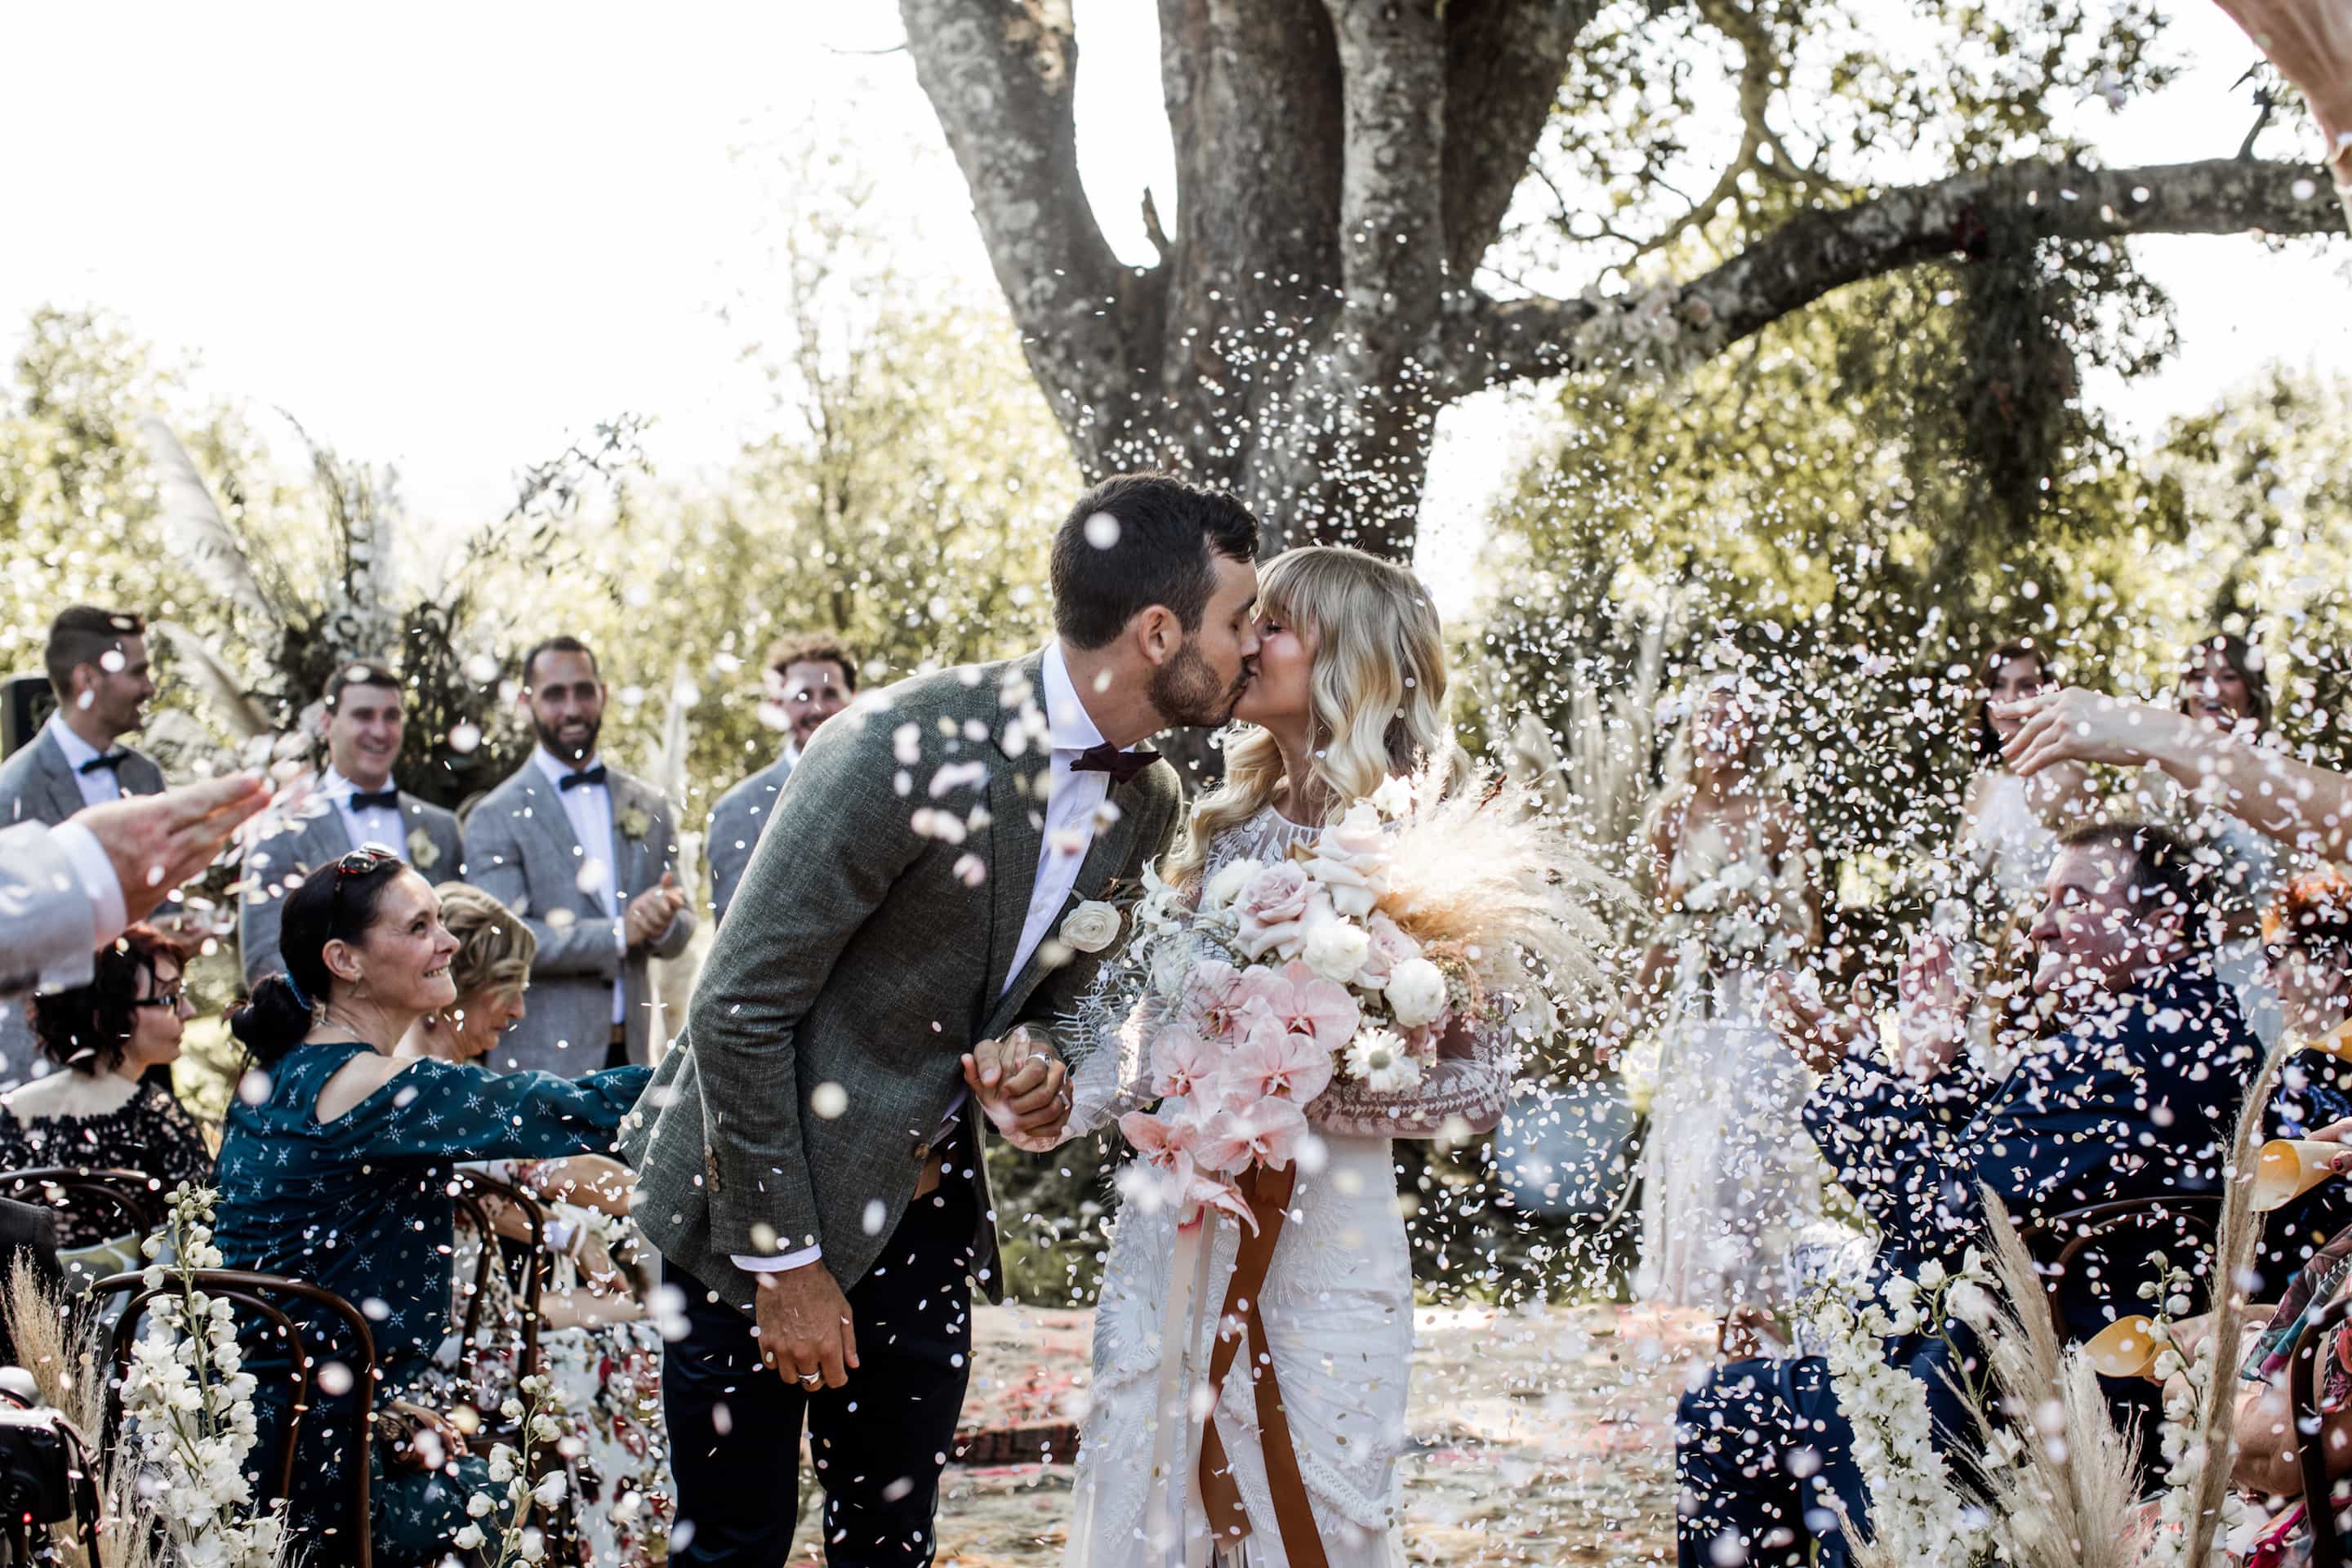 Bride and groom kiss after their Byron Bay wedding ceremony as guests throw flower petals for their exit